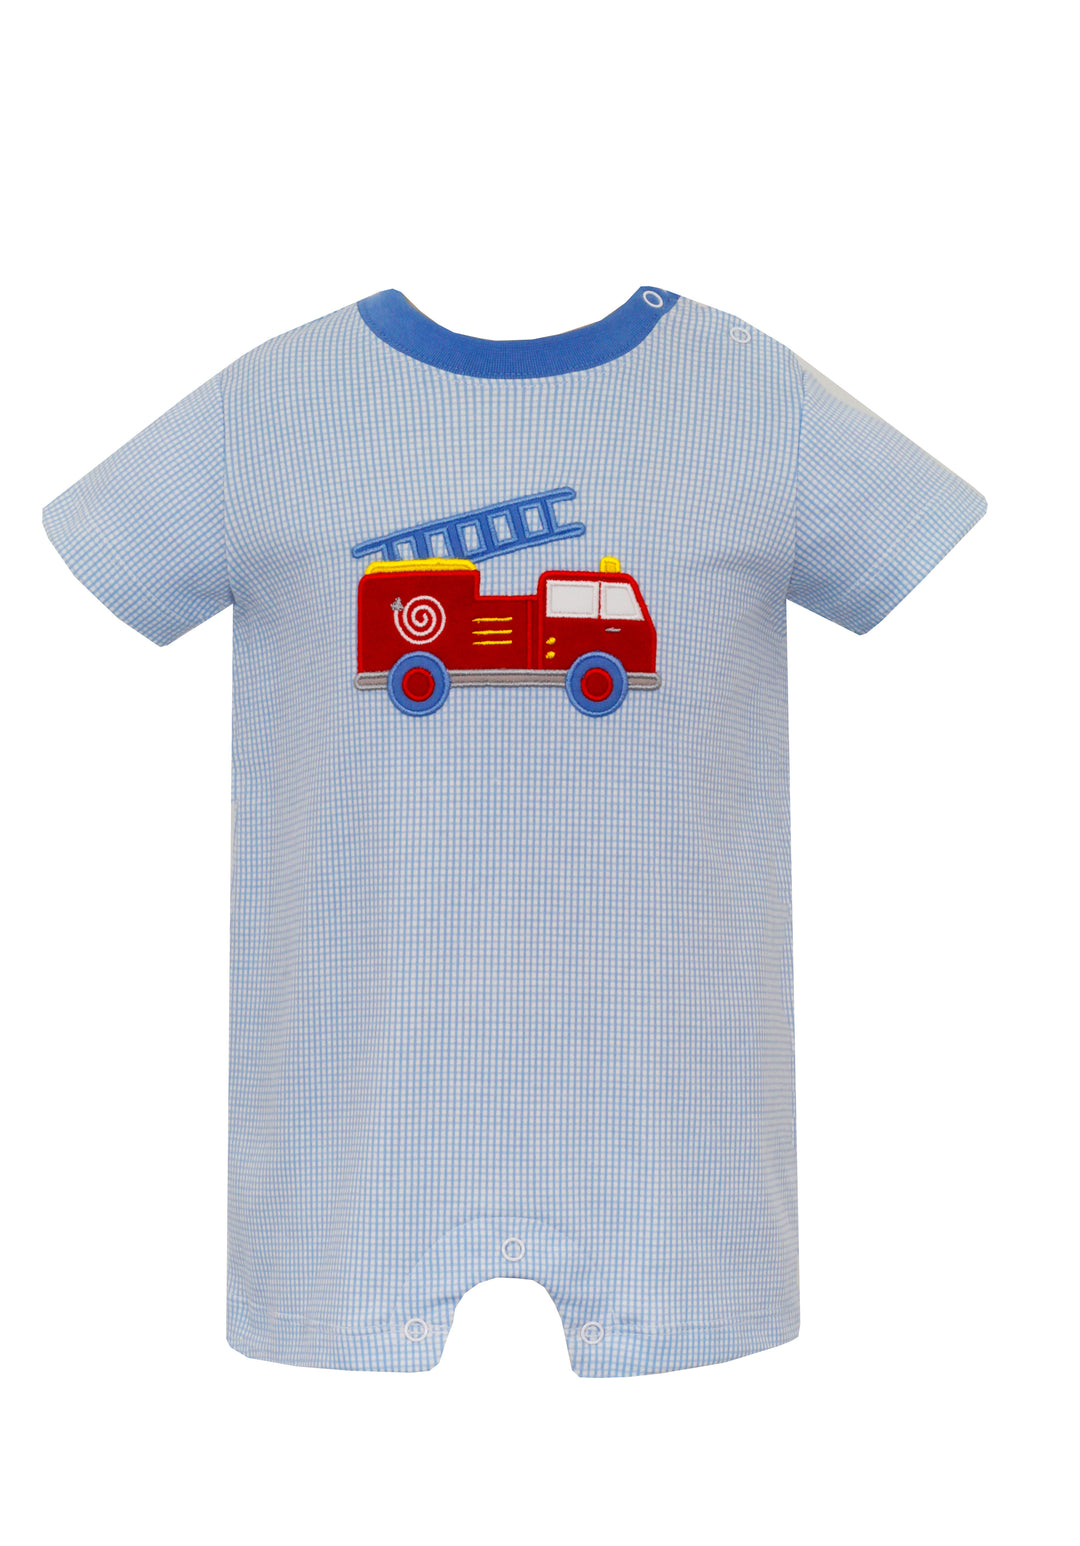 Blue Gingham Knit Romper with Firetruck Applique